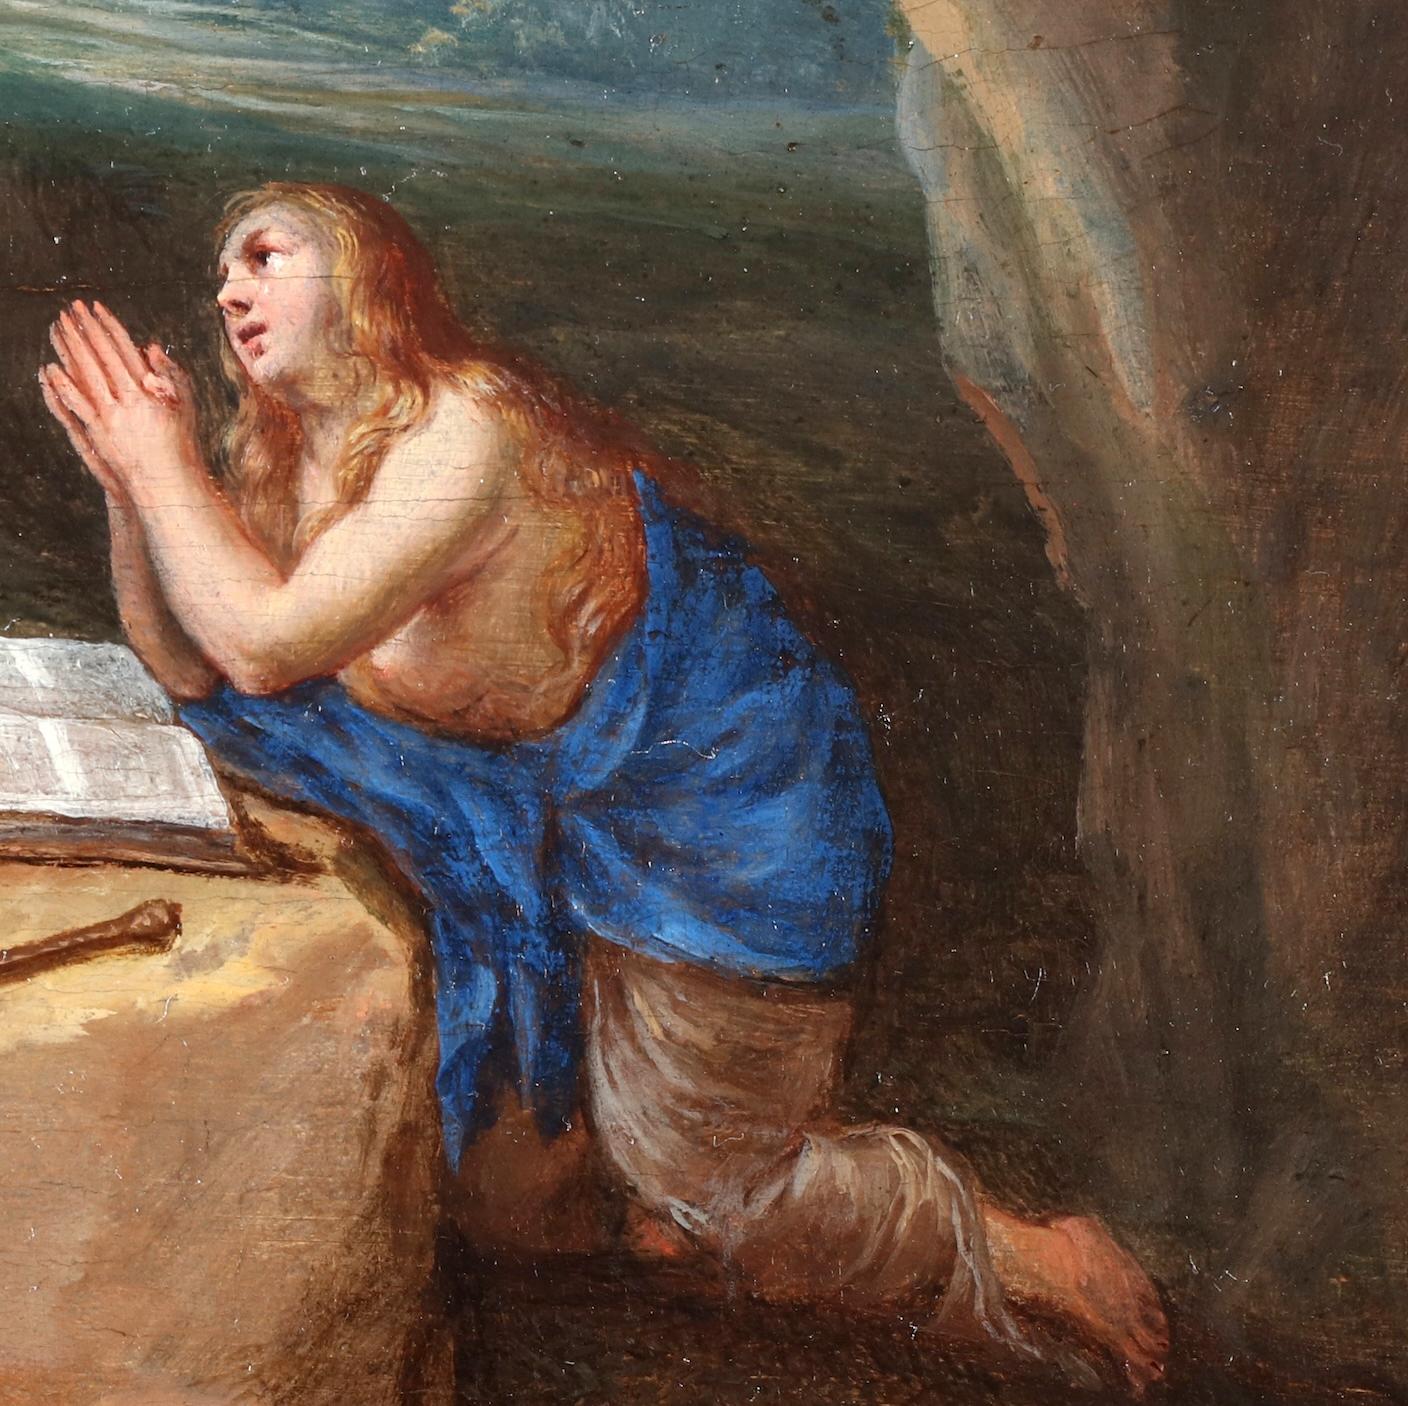 Mary Magdalene praying in her cave - Old Masters Painting by David Teniers I